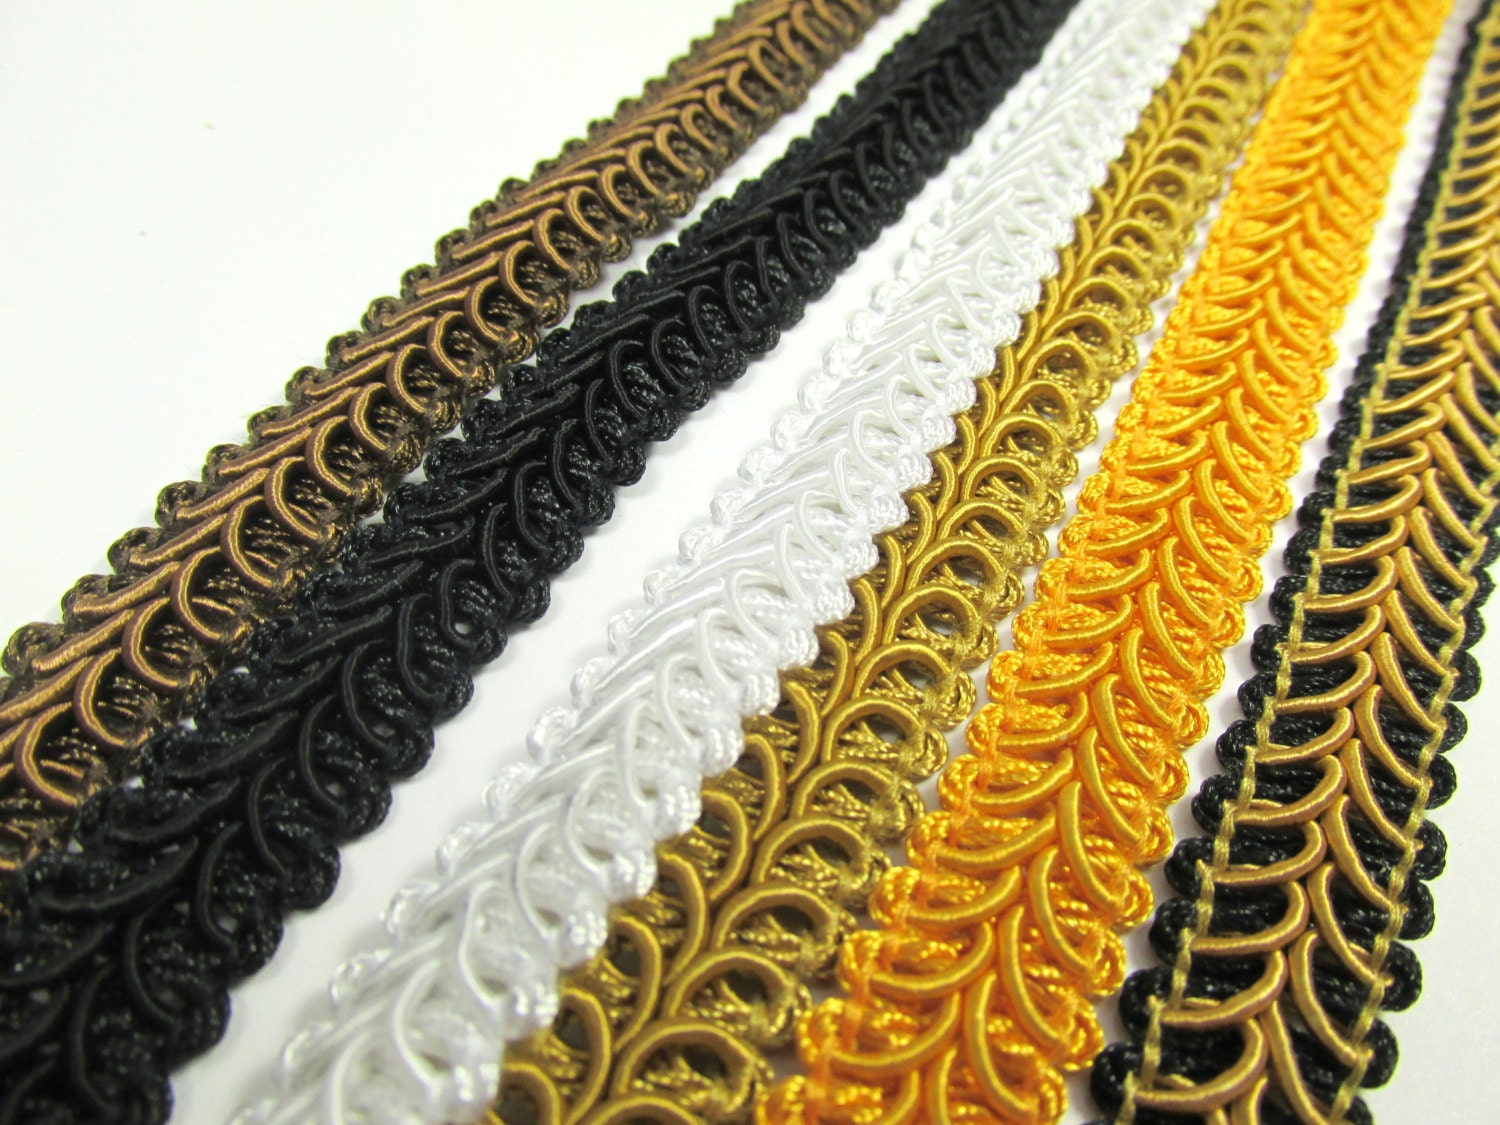 2 STYLES / MAJESTIC 2 Wide Tape Gimp Braid Trim / Drapery, Upholstery,  Pillows, Home Decor / by the Yard 